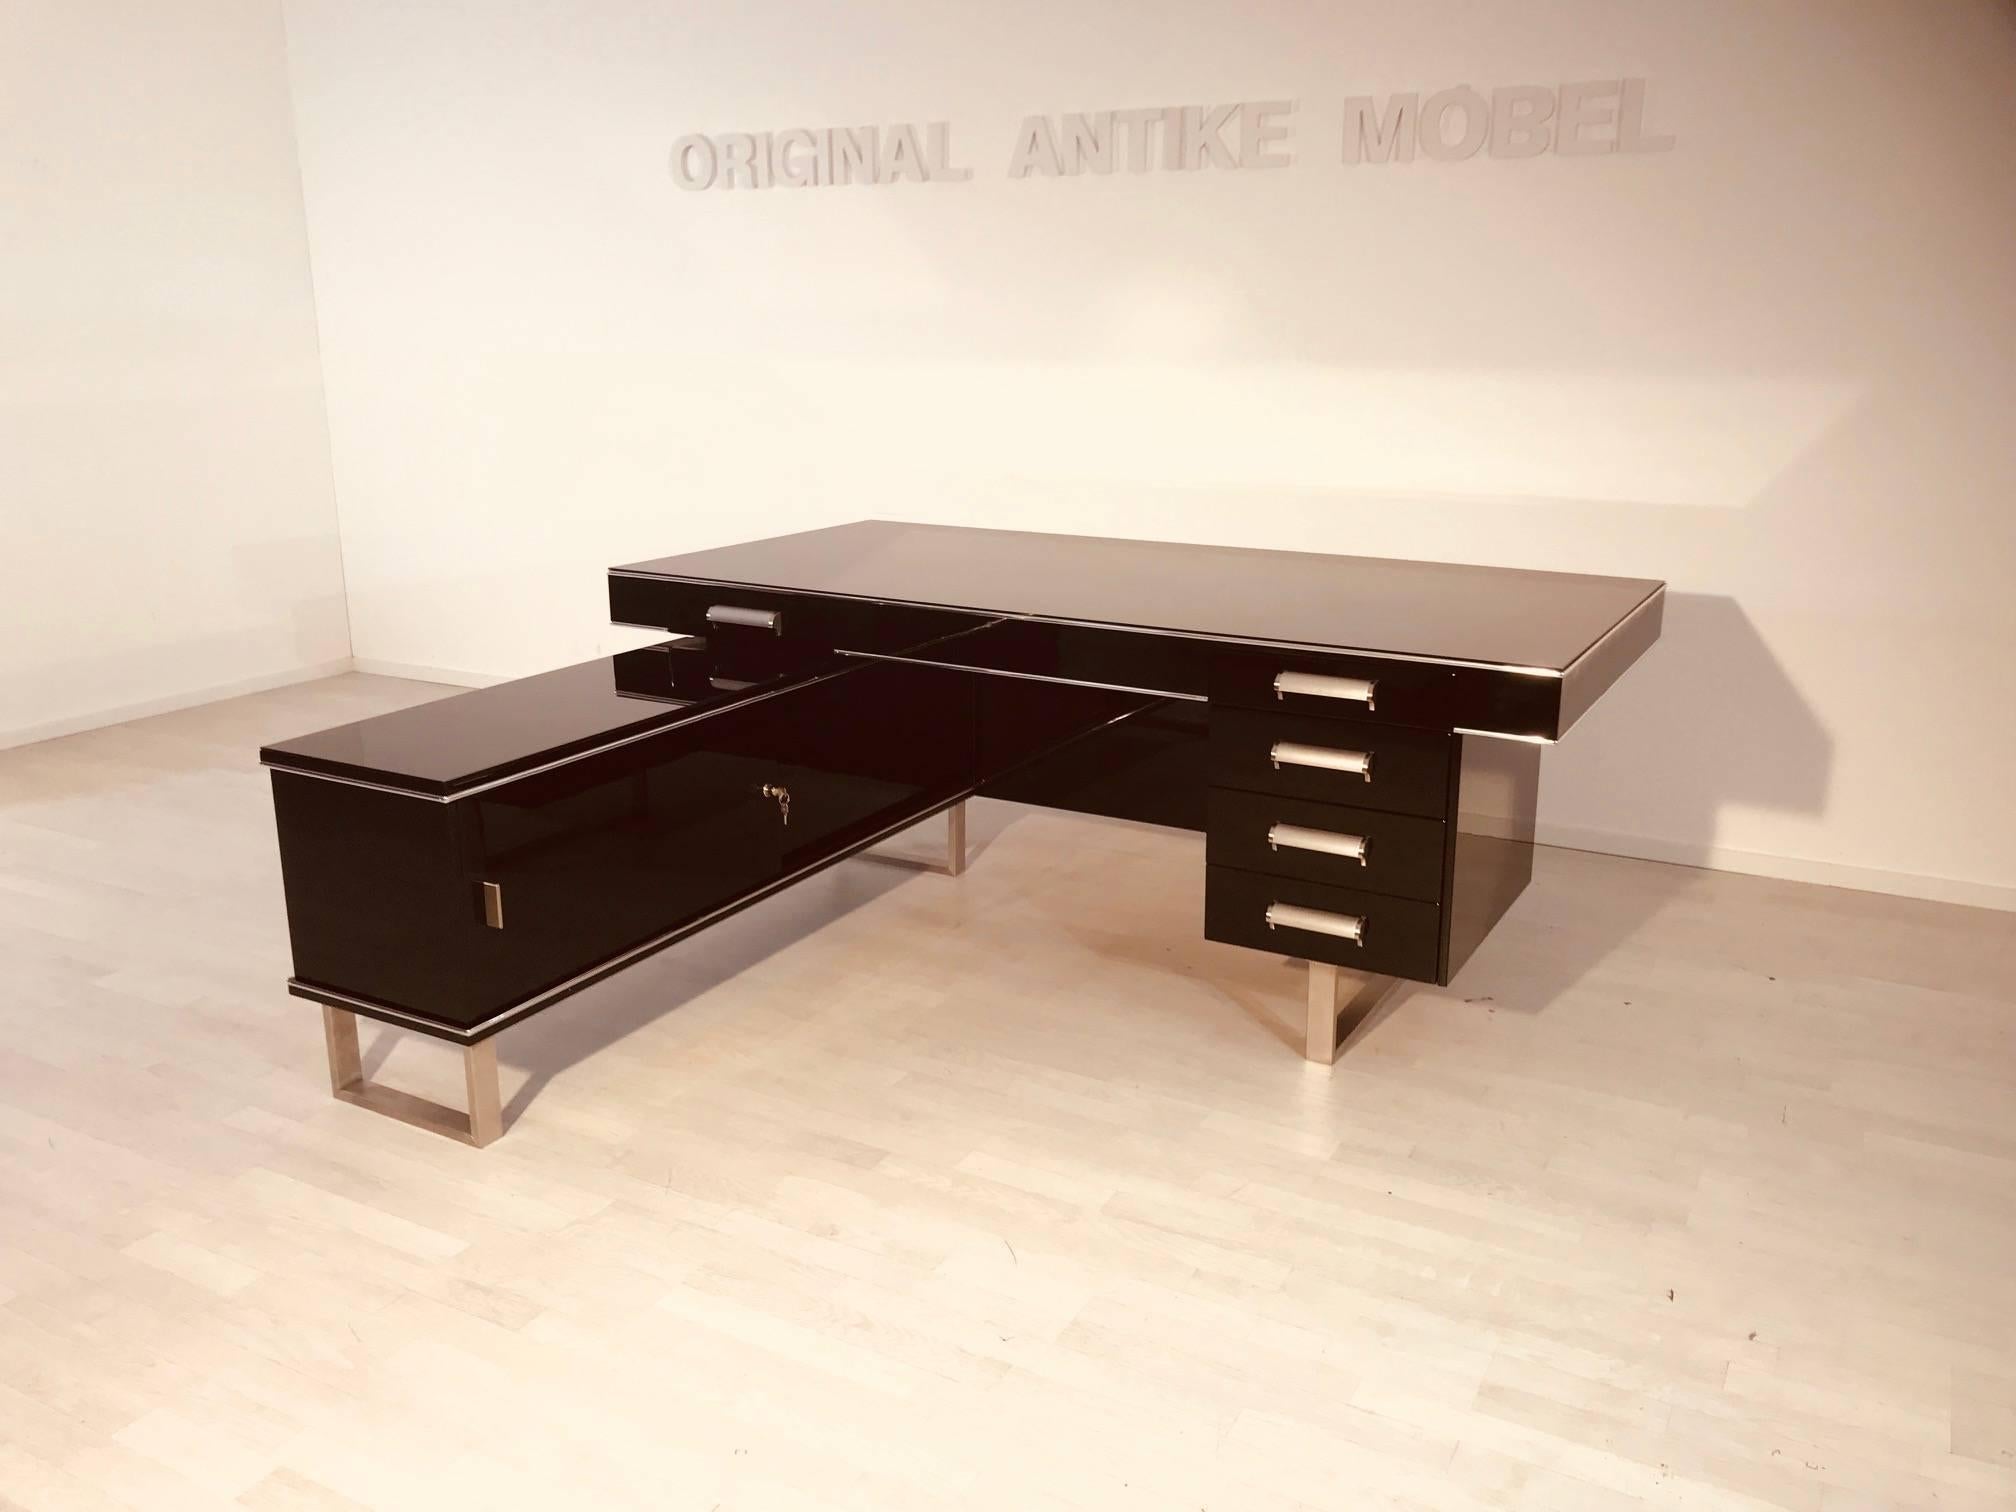 Bauhaus corner desk or partner desk. Simple body language und straight lines determine the design of this great piece of furniture! Wonderful straight body. Black high gloss lacquer. Chrome bars. Plenty of storage space with five drawers and a big